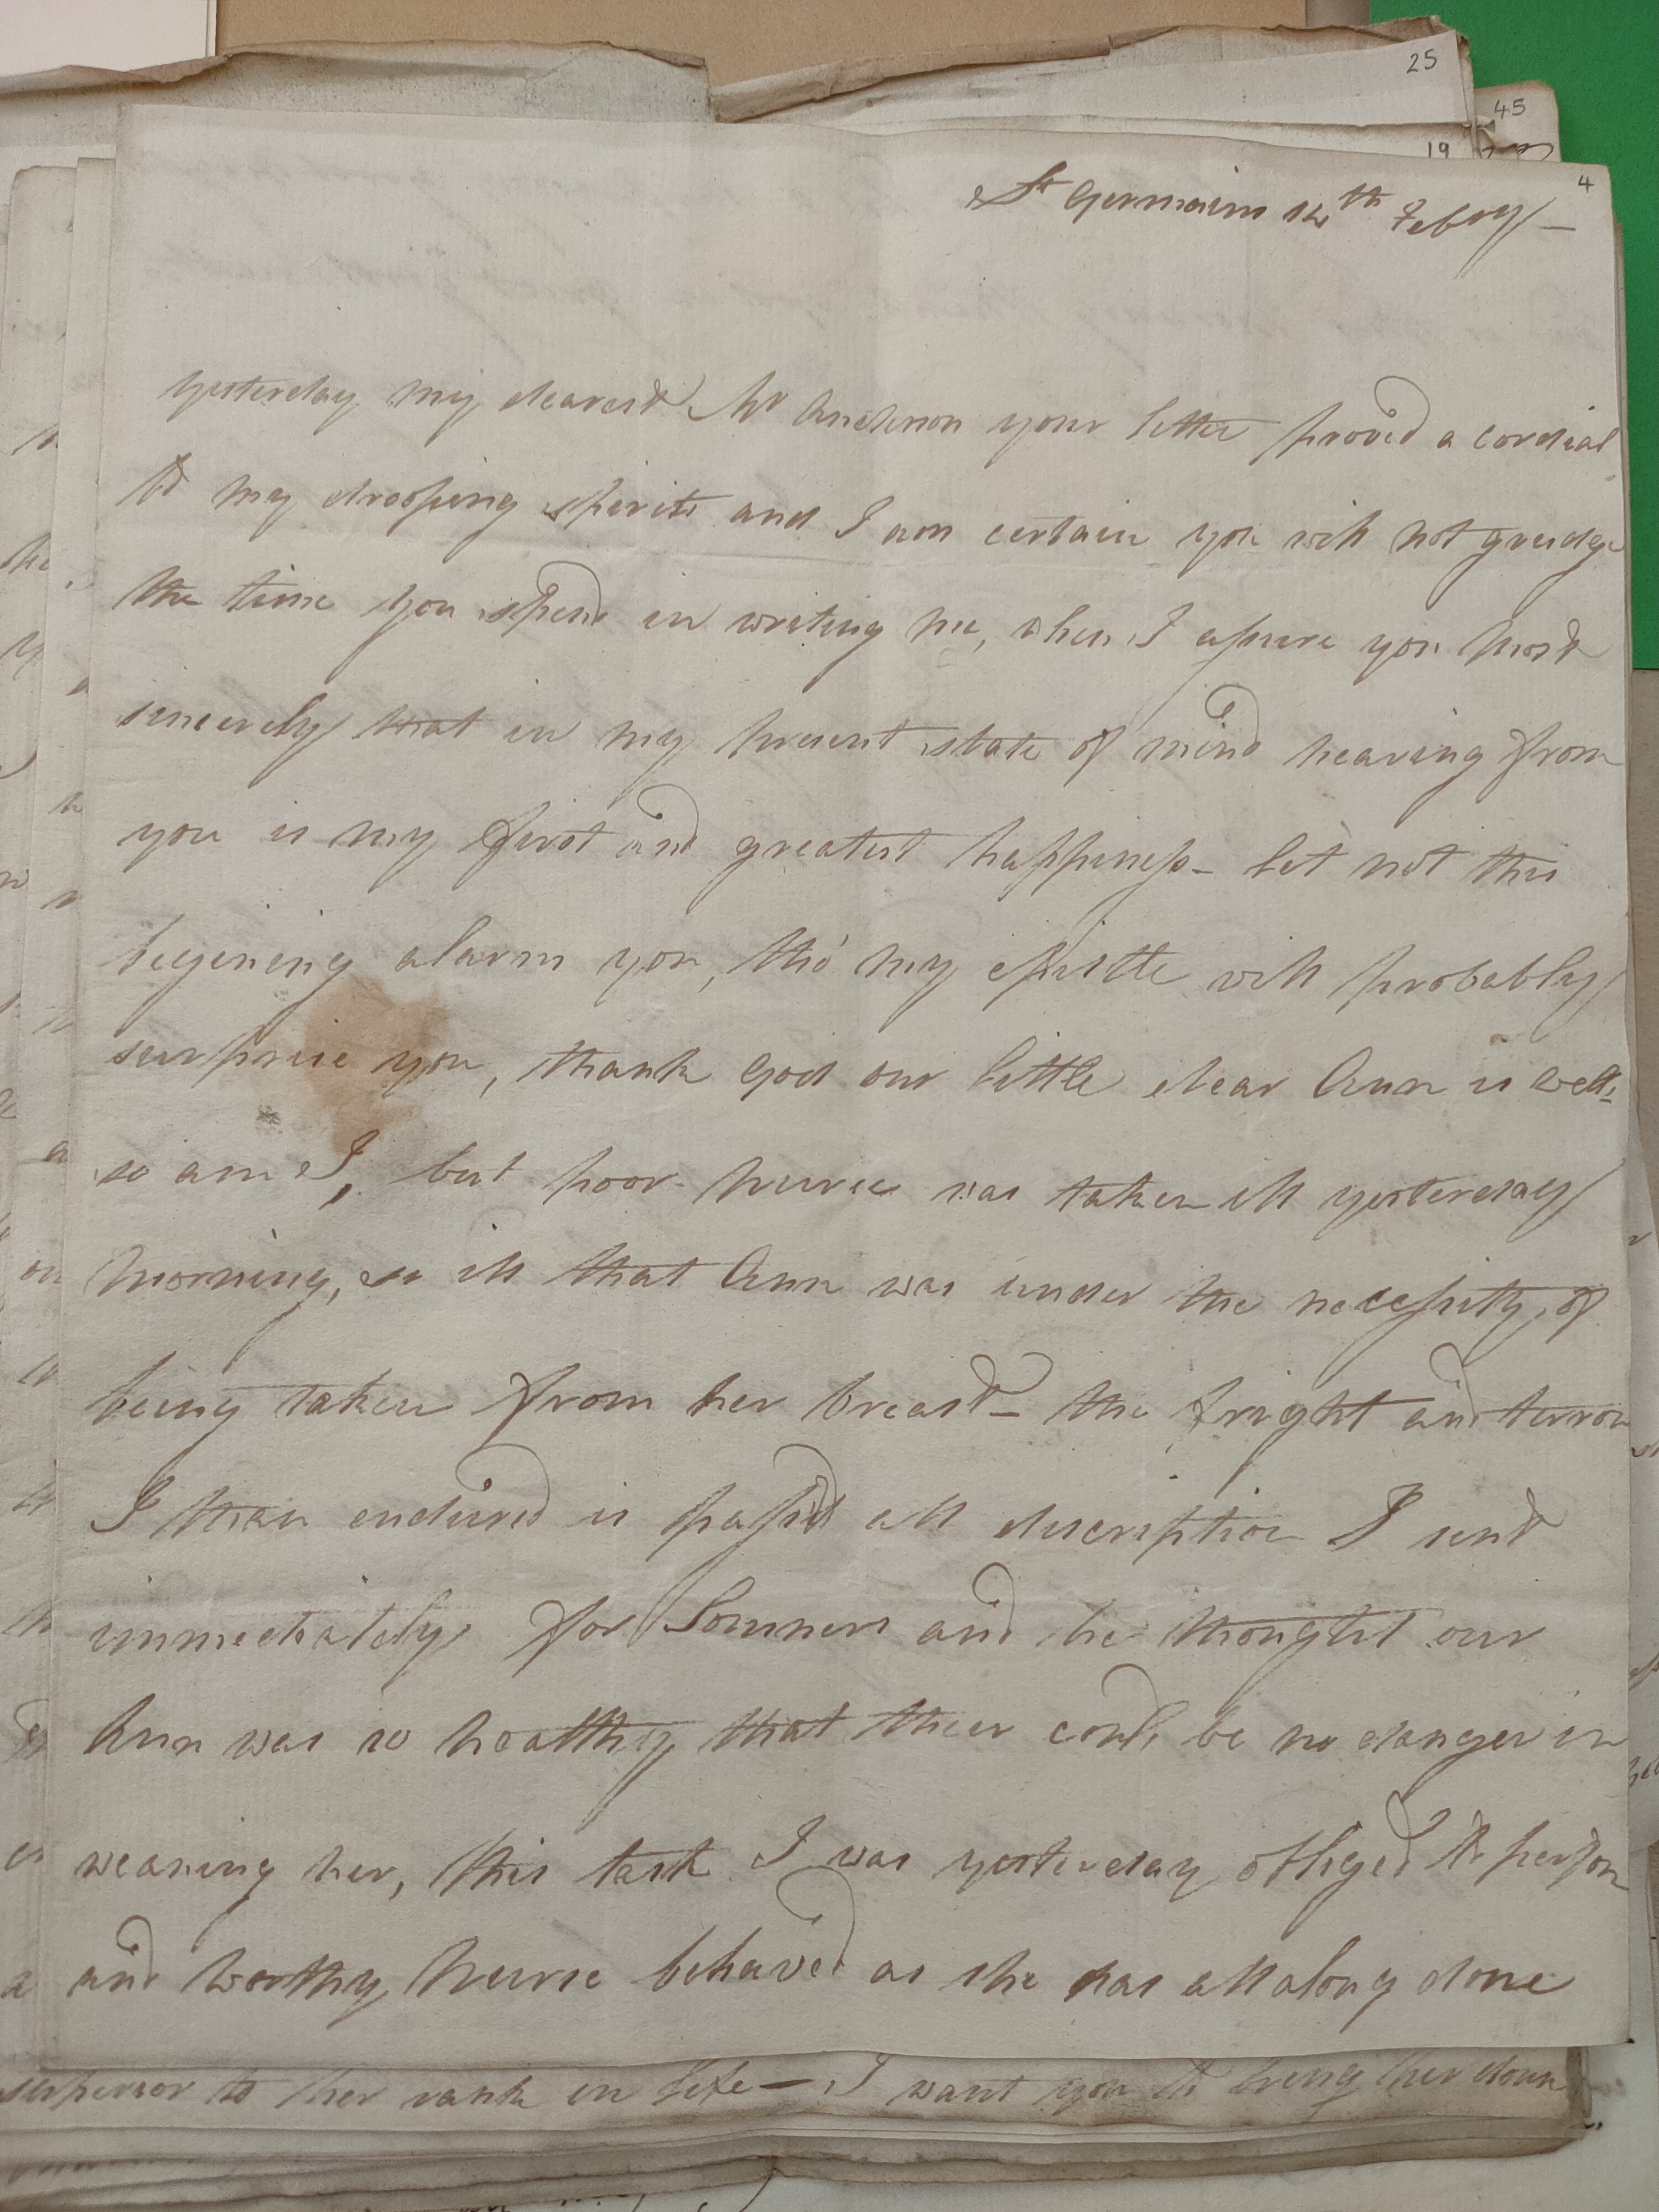 Image #1 of letter: Christina Findlay to David Anderson, 14 February 1790